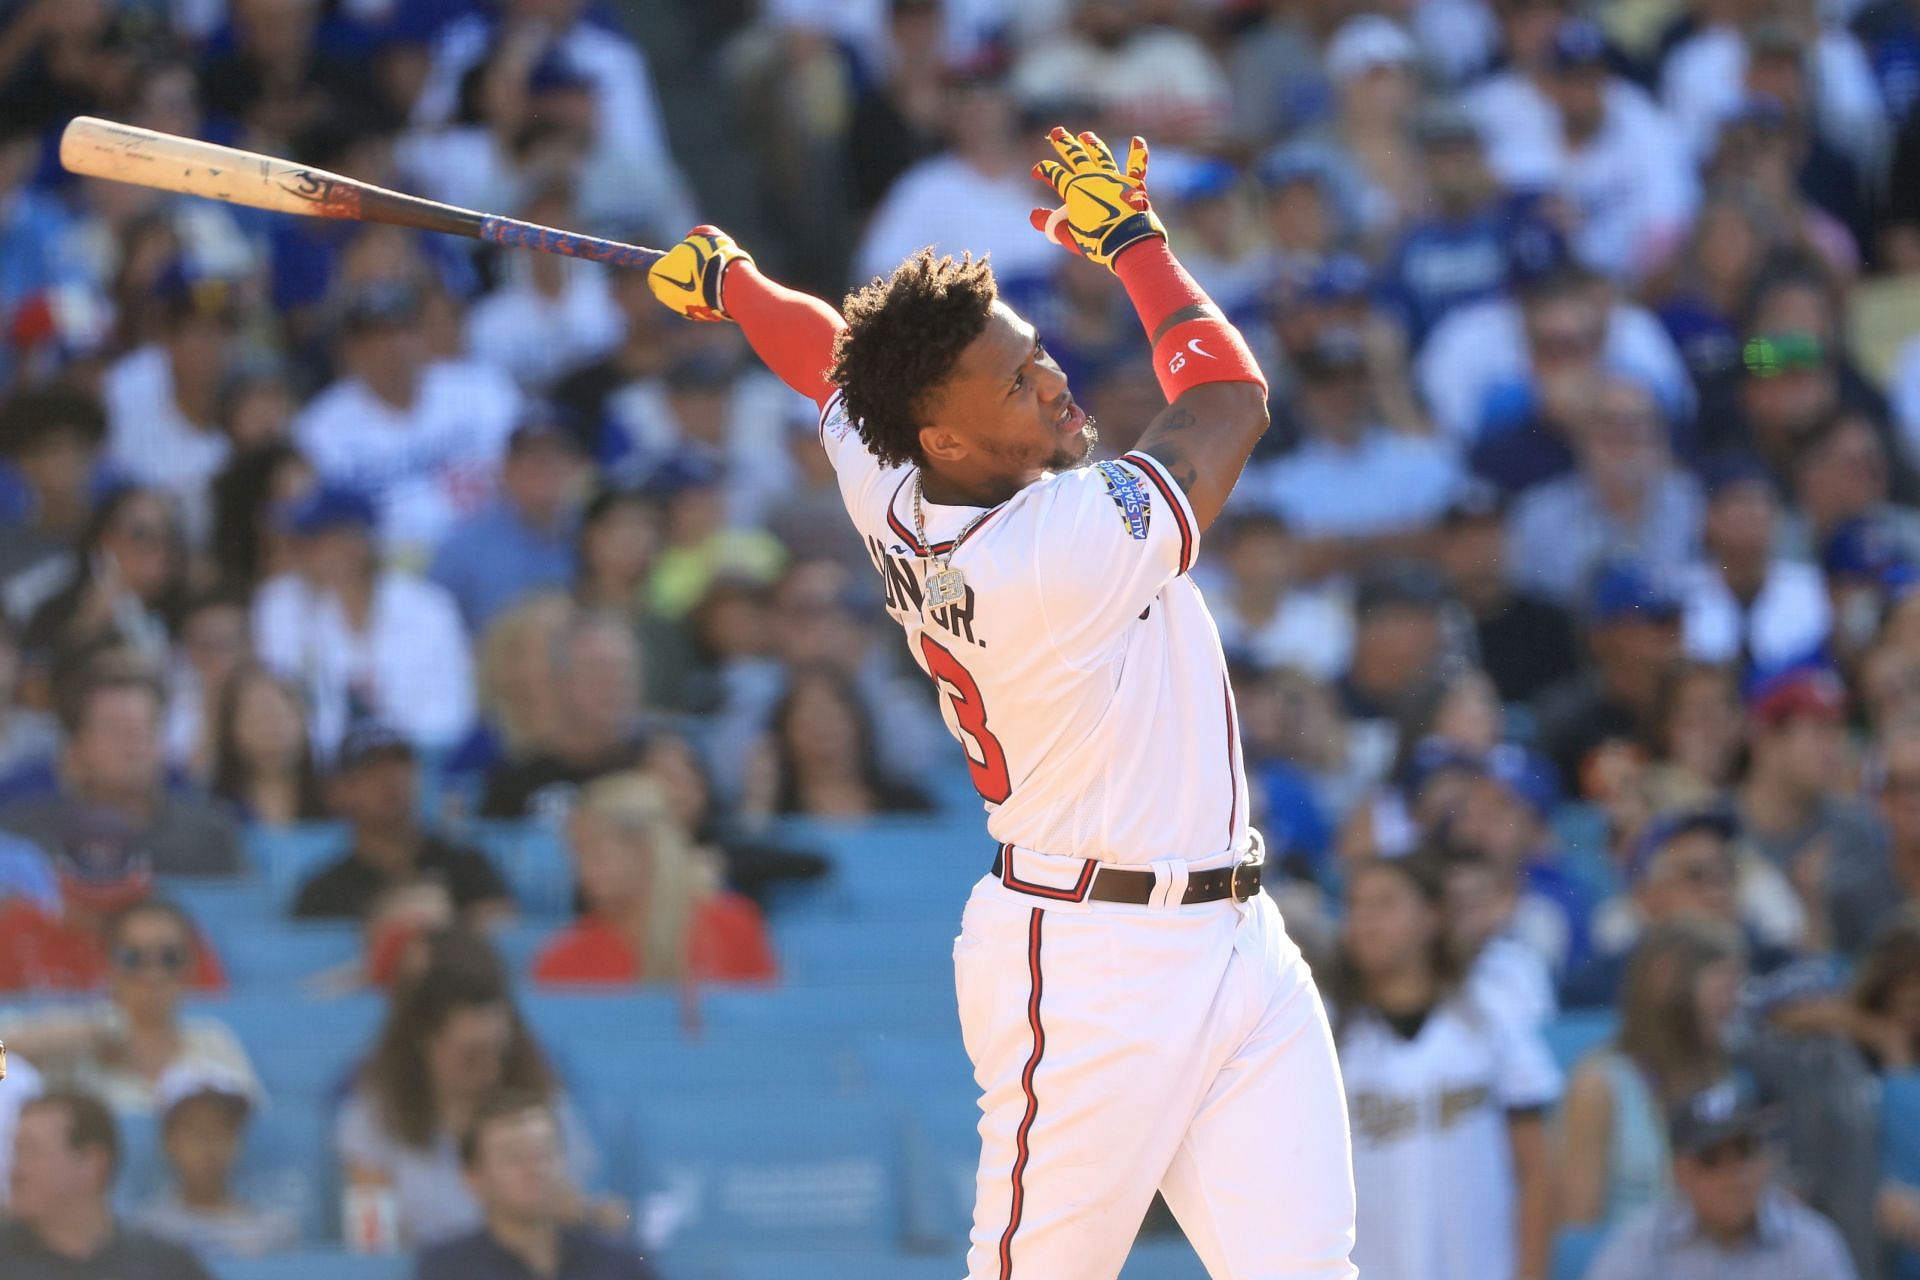 Ronald Acuna Jr. during the 2022 T-Mobile Home Run Derby.